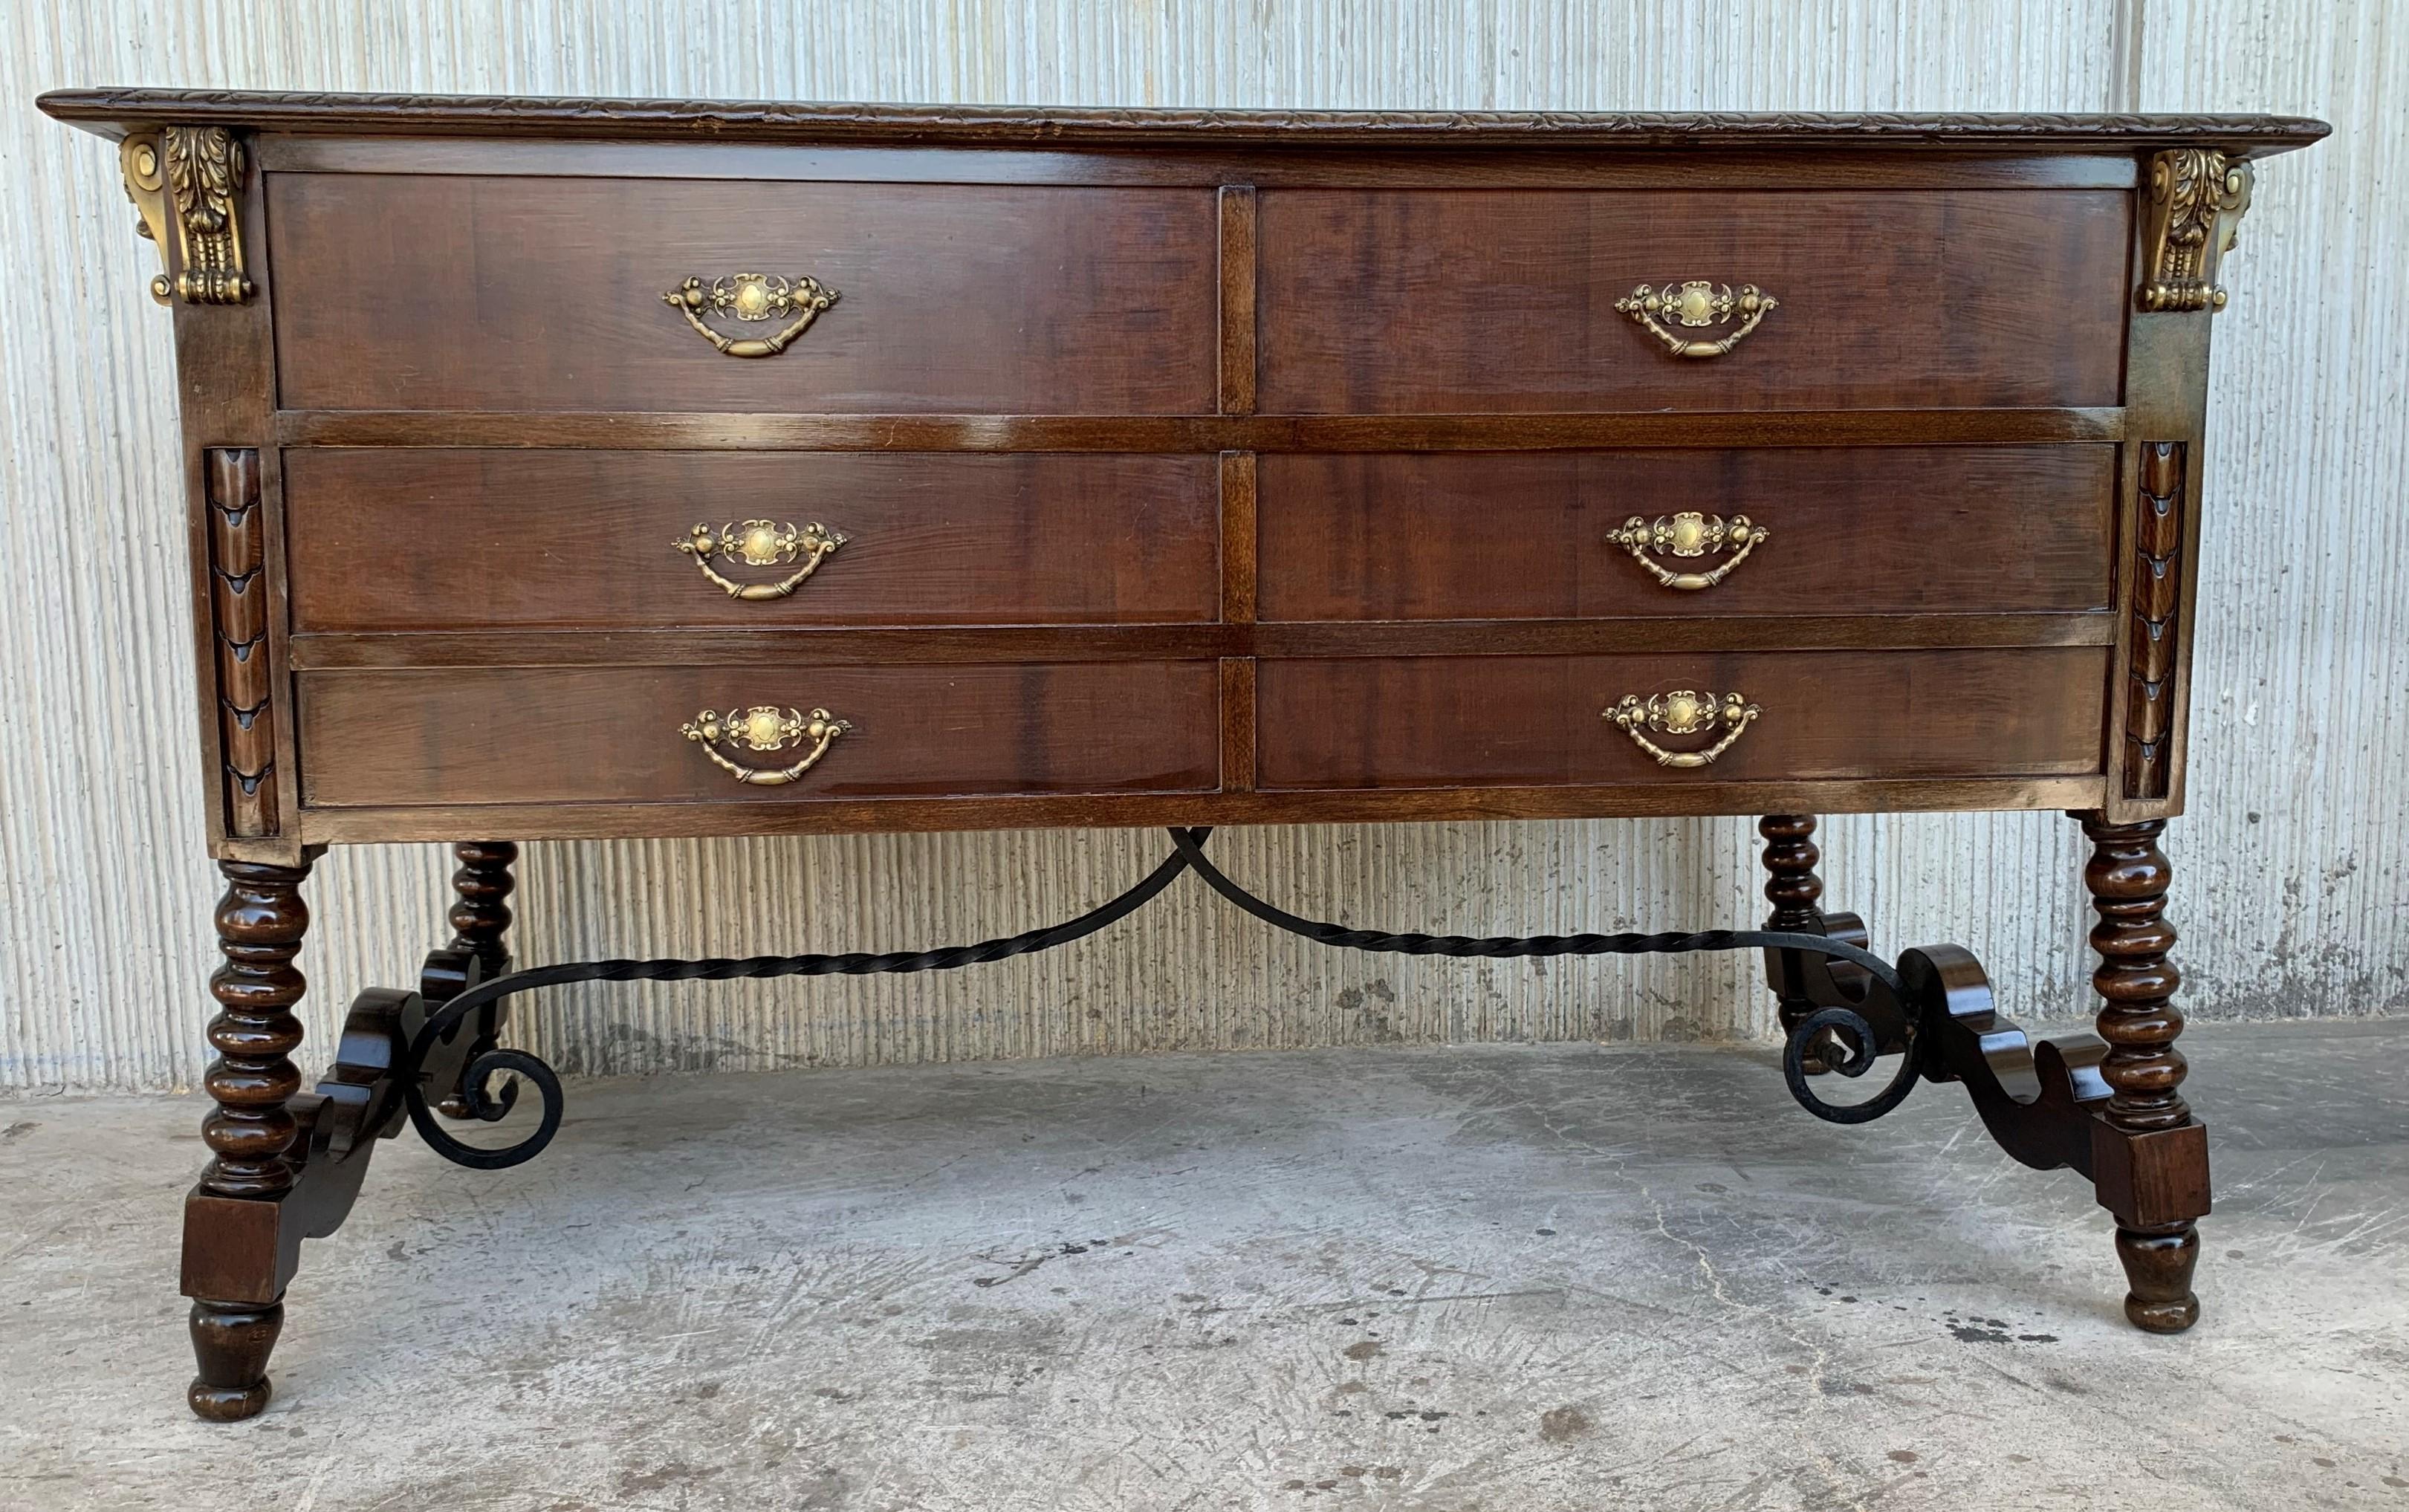 This impressive butcher block it has two faces. One side it has six drawers (picture 3) and the other side it has figurative six drawers without opened (picture 1 & 2), 18th century.
Very sturdy and beautiful.
Completely restored
You can use like